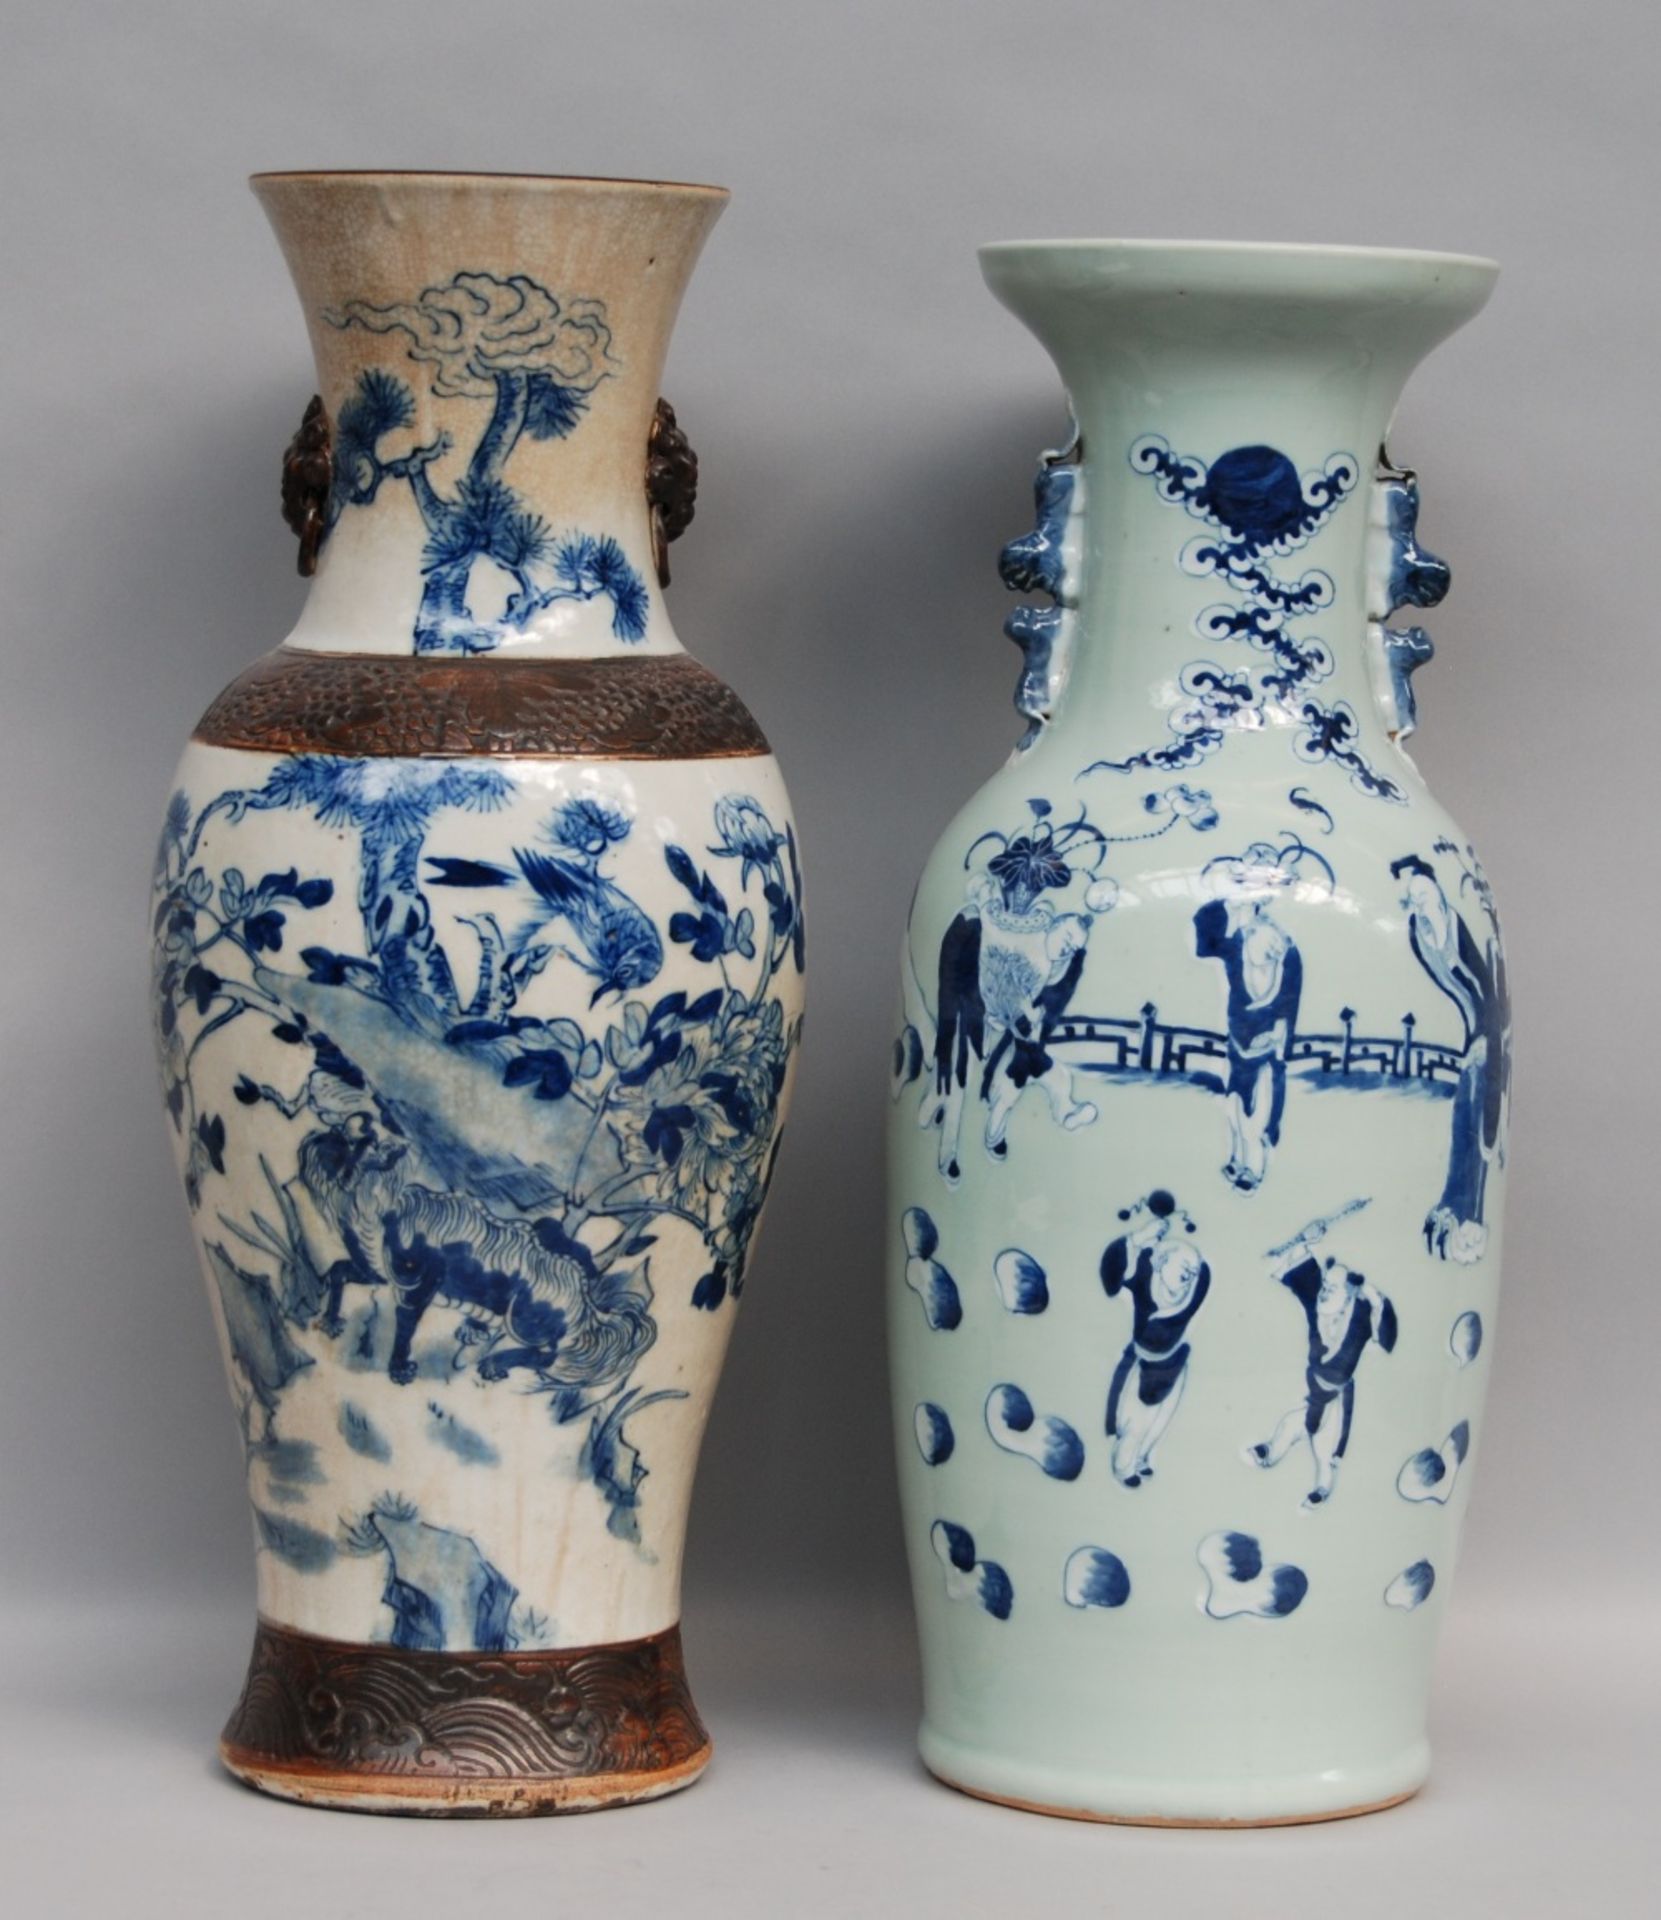 Two Chinese blue and white vases, 19thC, H 59,5 (crack in the bottom) - H 61,5 cm